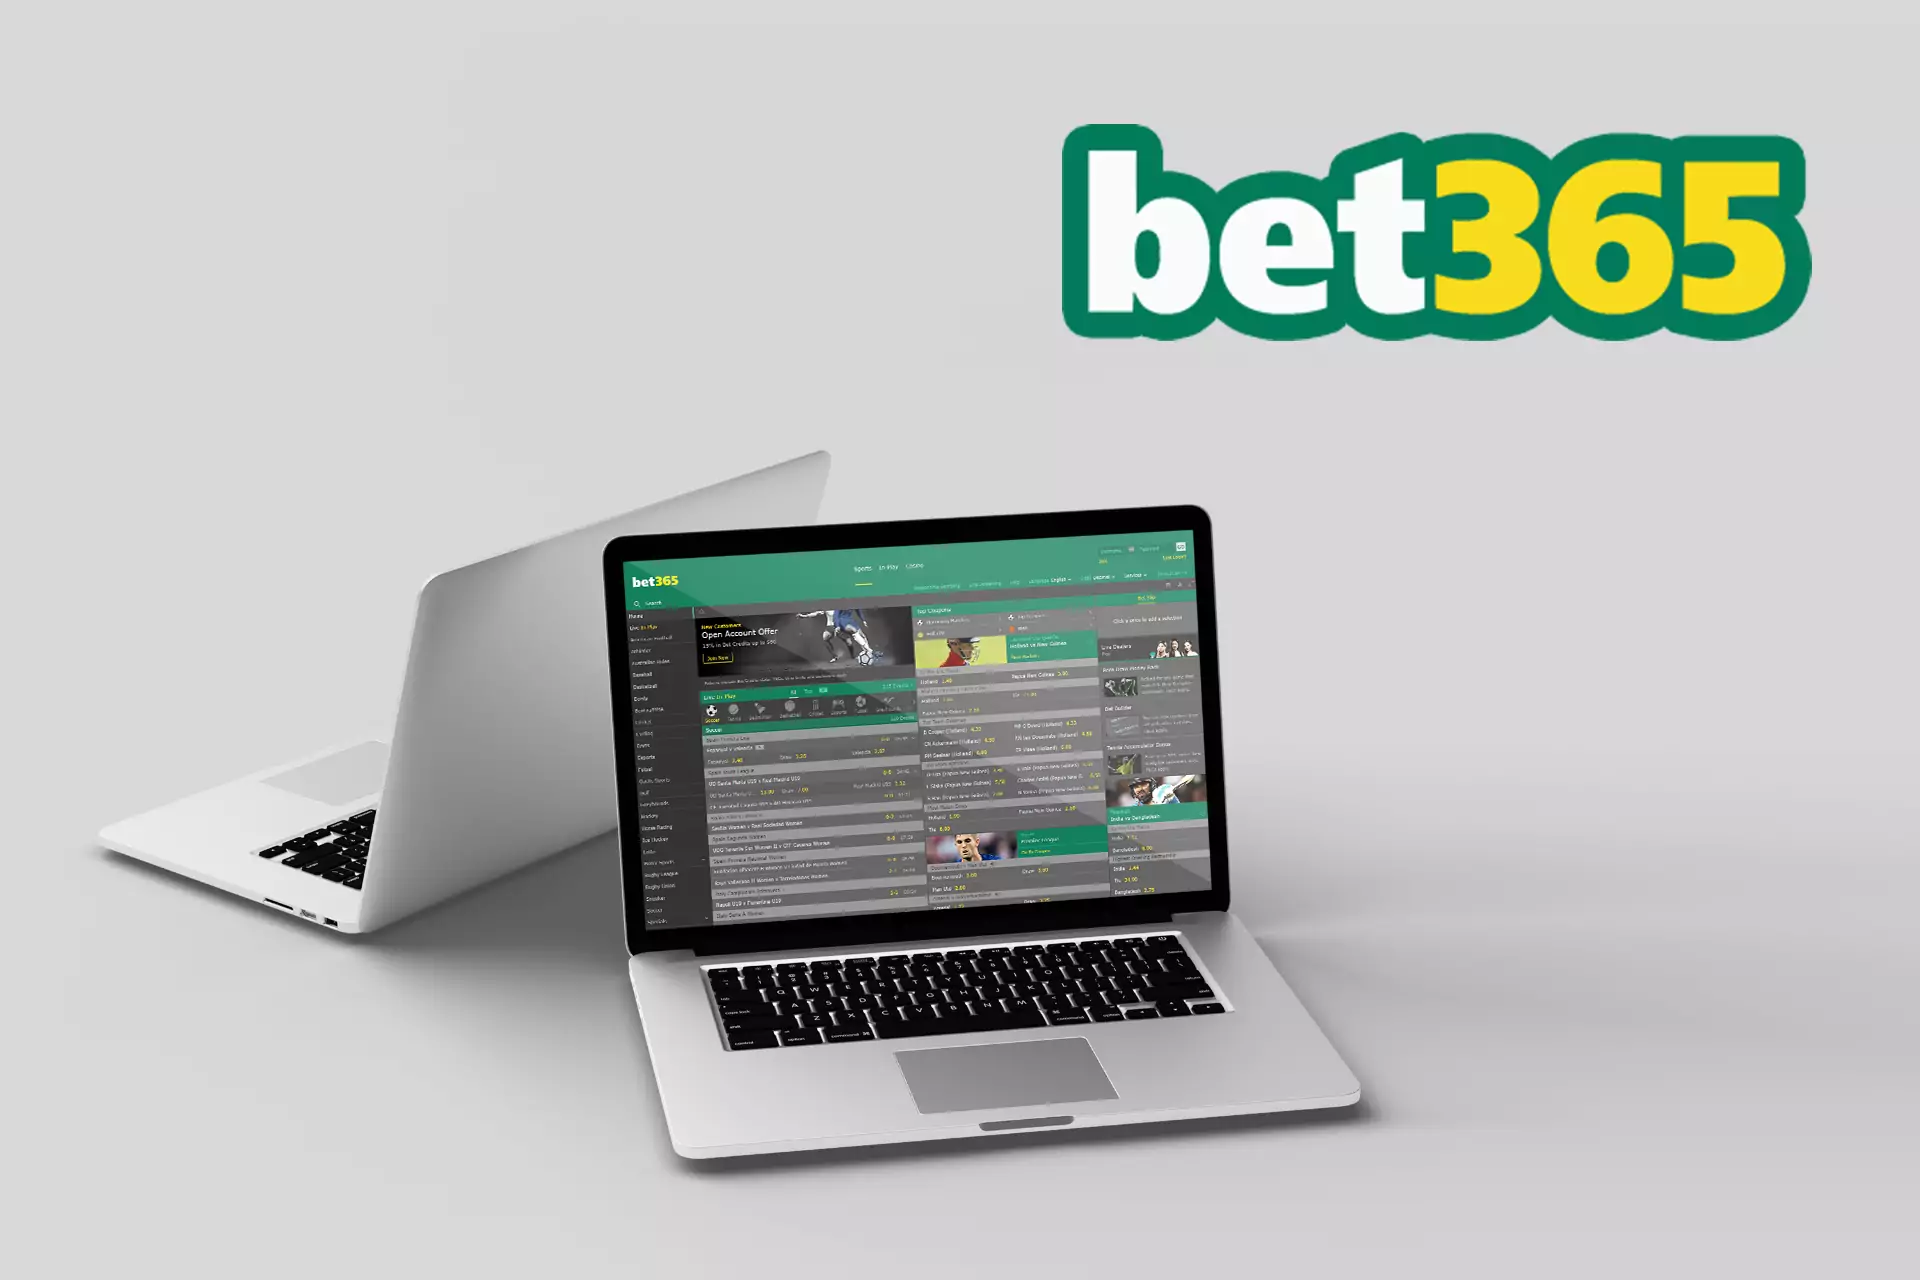 Bet365 uses familiar for US users' payment methods.